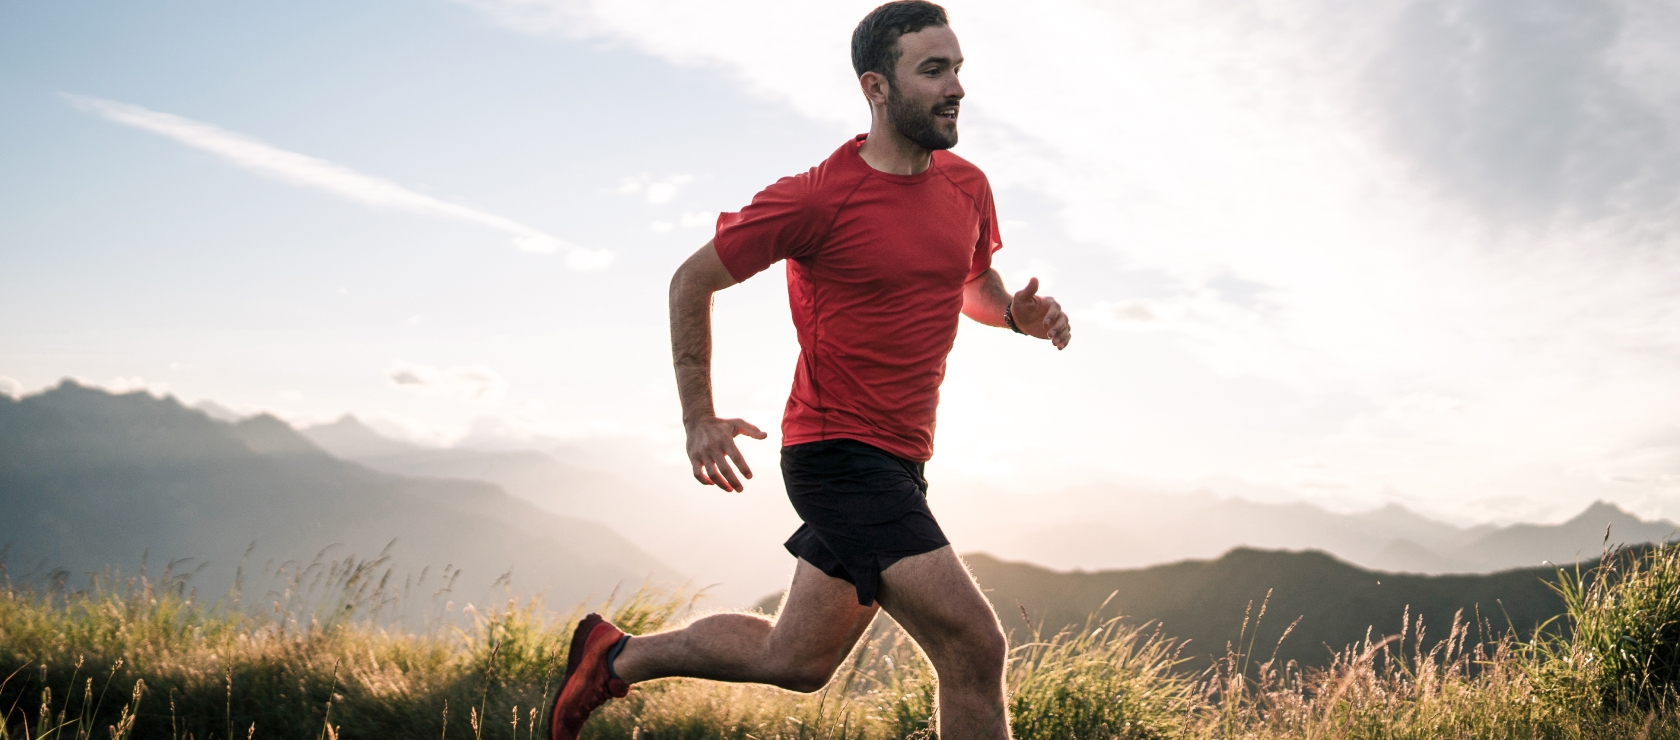 <p>Middle aged man running in a field of grass, surrounded by mountains.</p>
